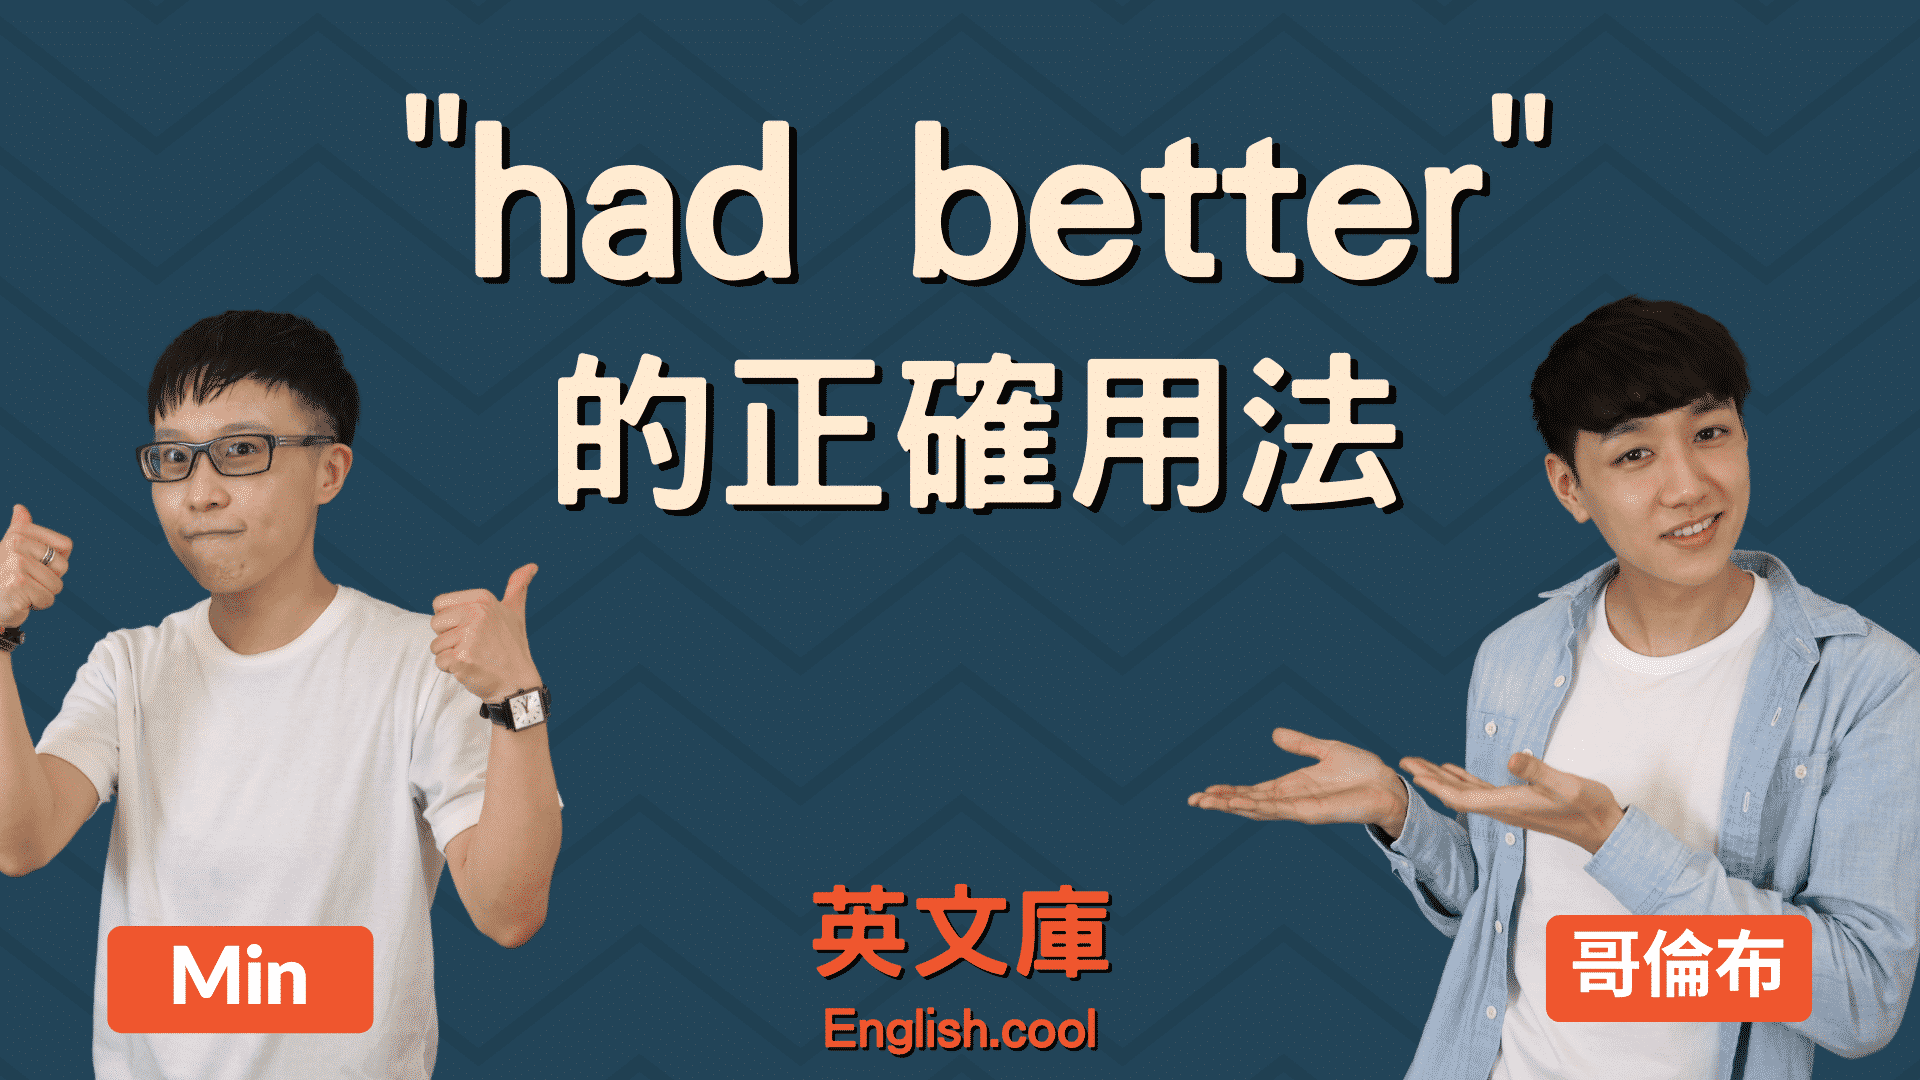 You are currently viewing ”had better“ 正確用法是？是助動詞嗎？（含例句）